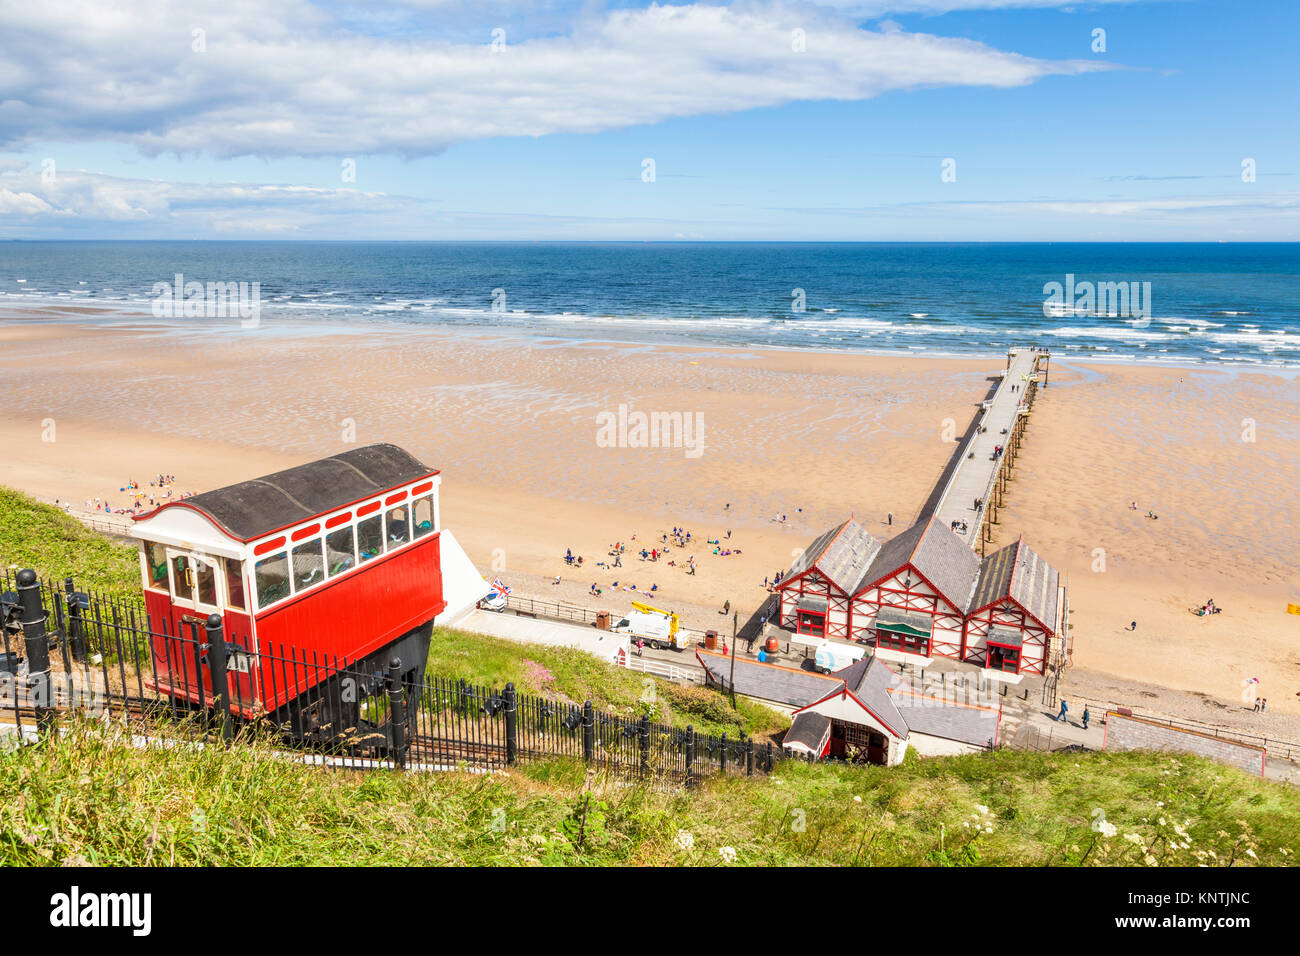 England saltburn by the sea England tramway saltburn cliff railway saltburn cliff tramway saltburn North Yorkshire Redcar and Cleveland England uk gb Stock Photo